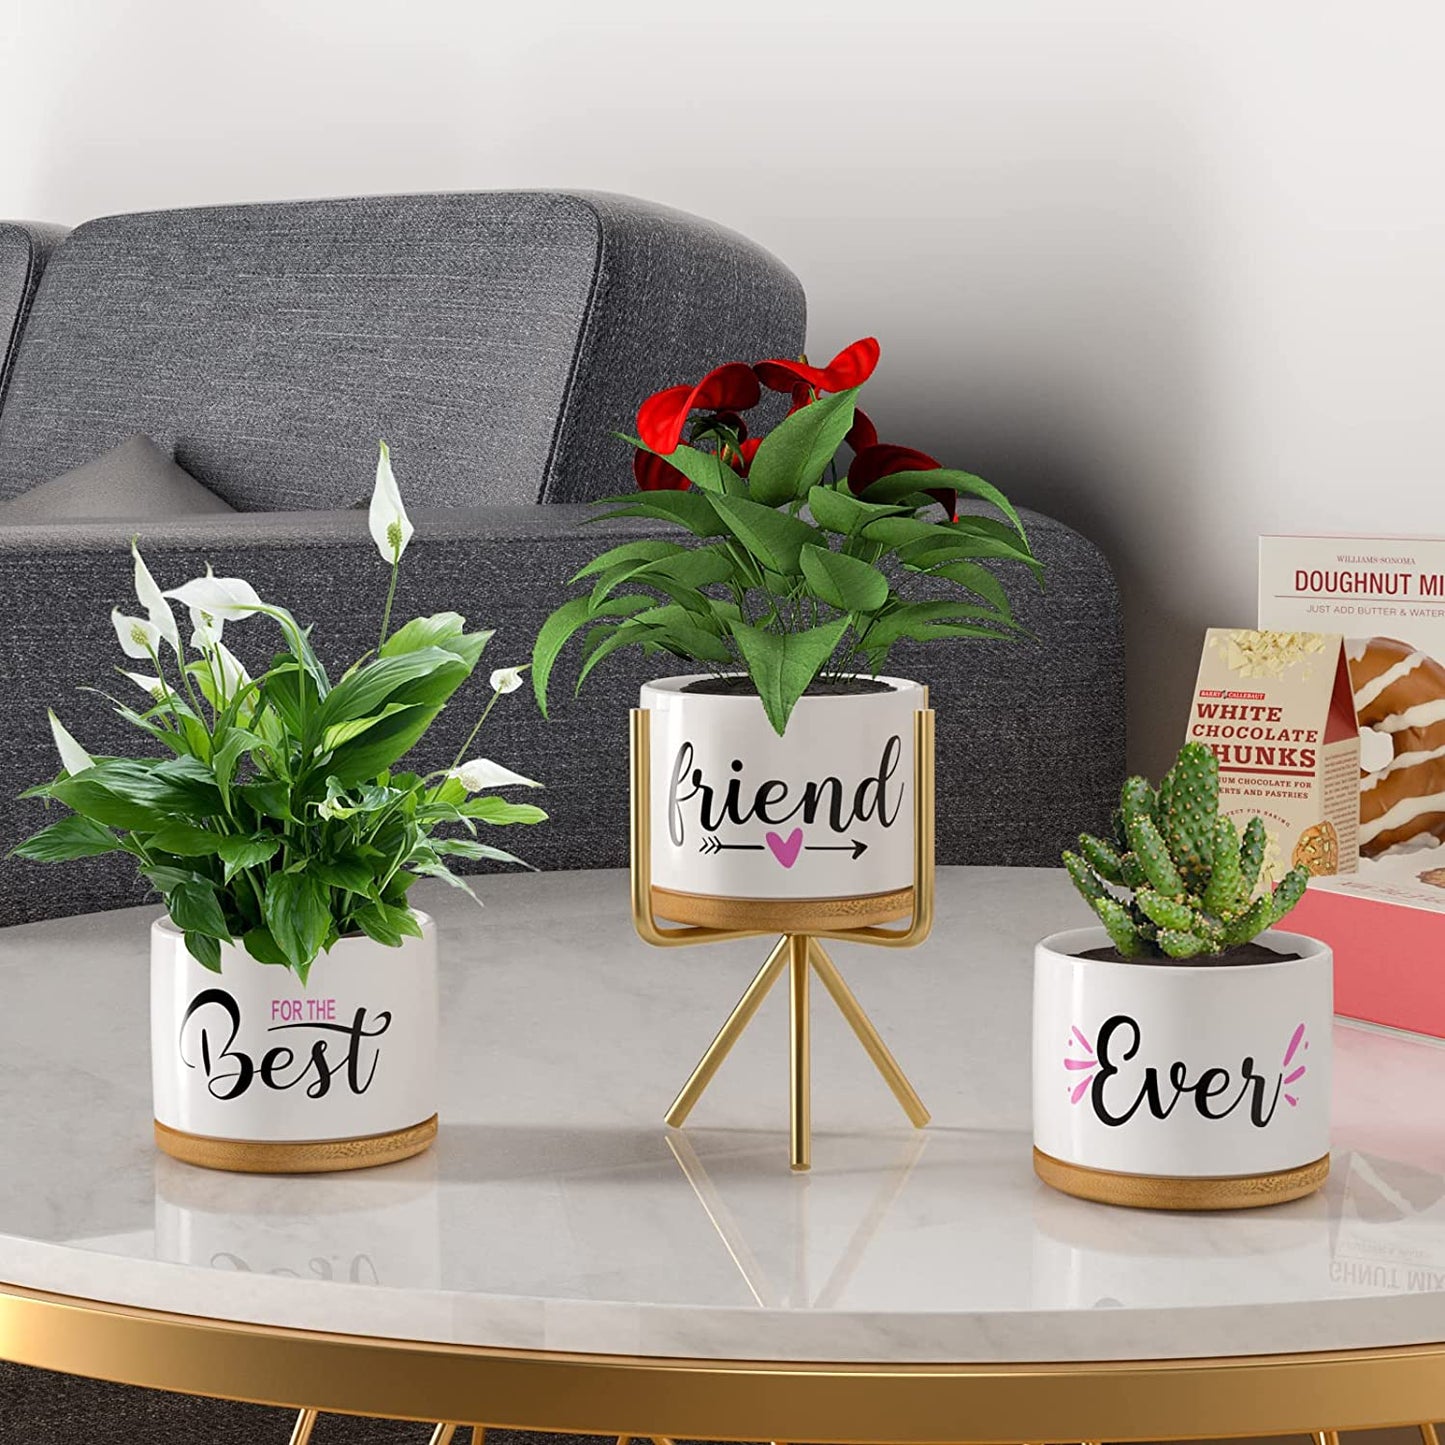 Best Friend Birthday Gifts for Women, Christmas BFF Friendship Gifts for Women & Men, Best Friend Ever Succulent Pots Indoor Outdoor, Gift Boxed Ceramic Planter Gift Set for Friends Female Bestie - FoxMart™️ - TuDou